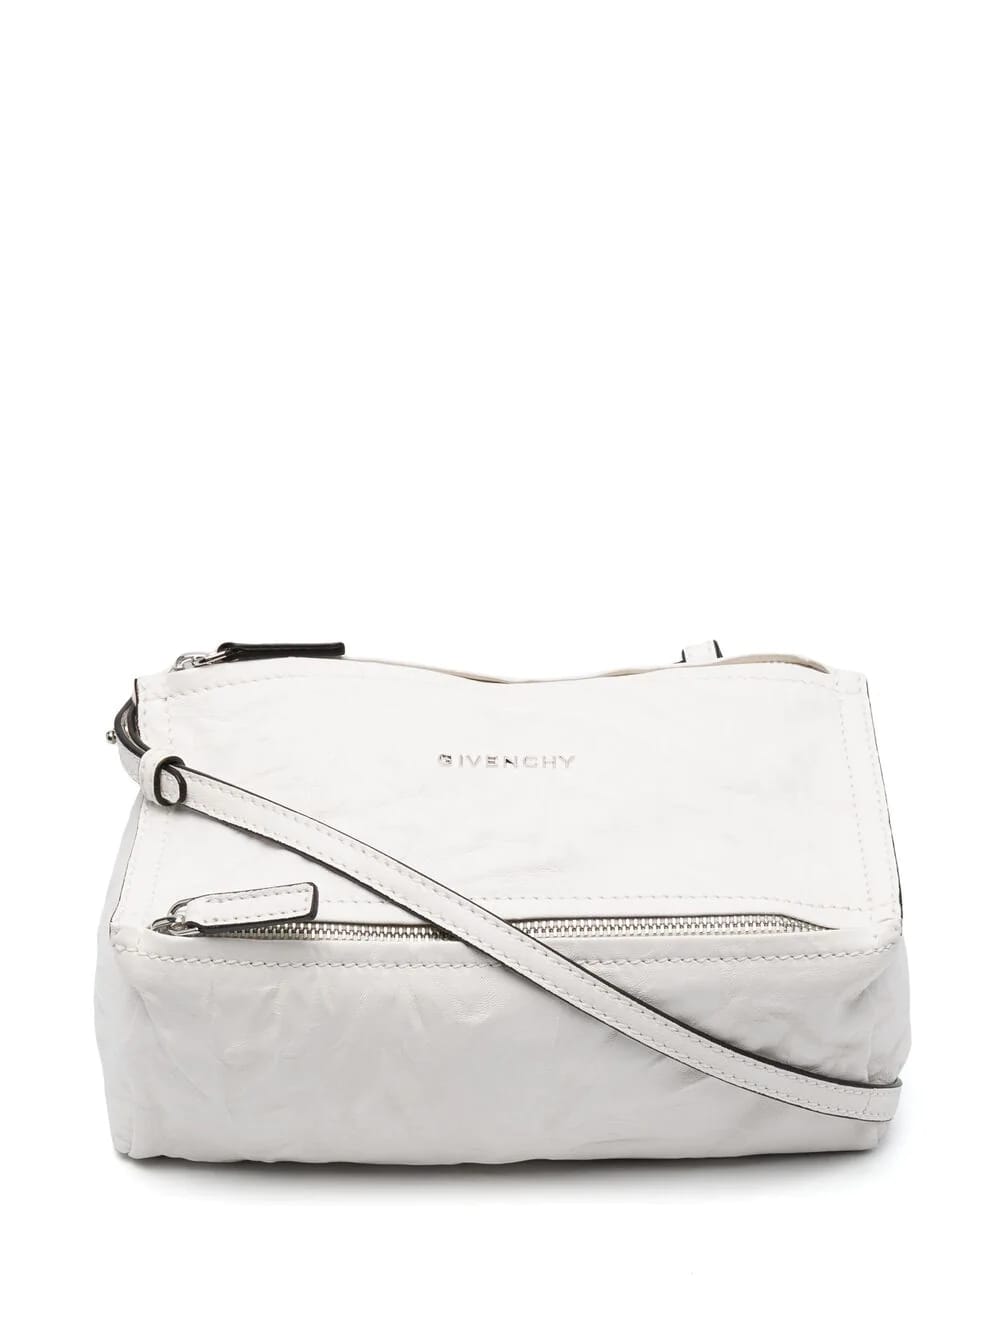 Givenchy White Mini Pandora Bag In Aged Leather